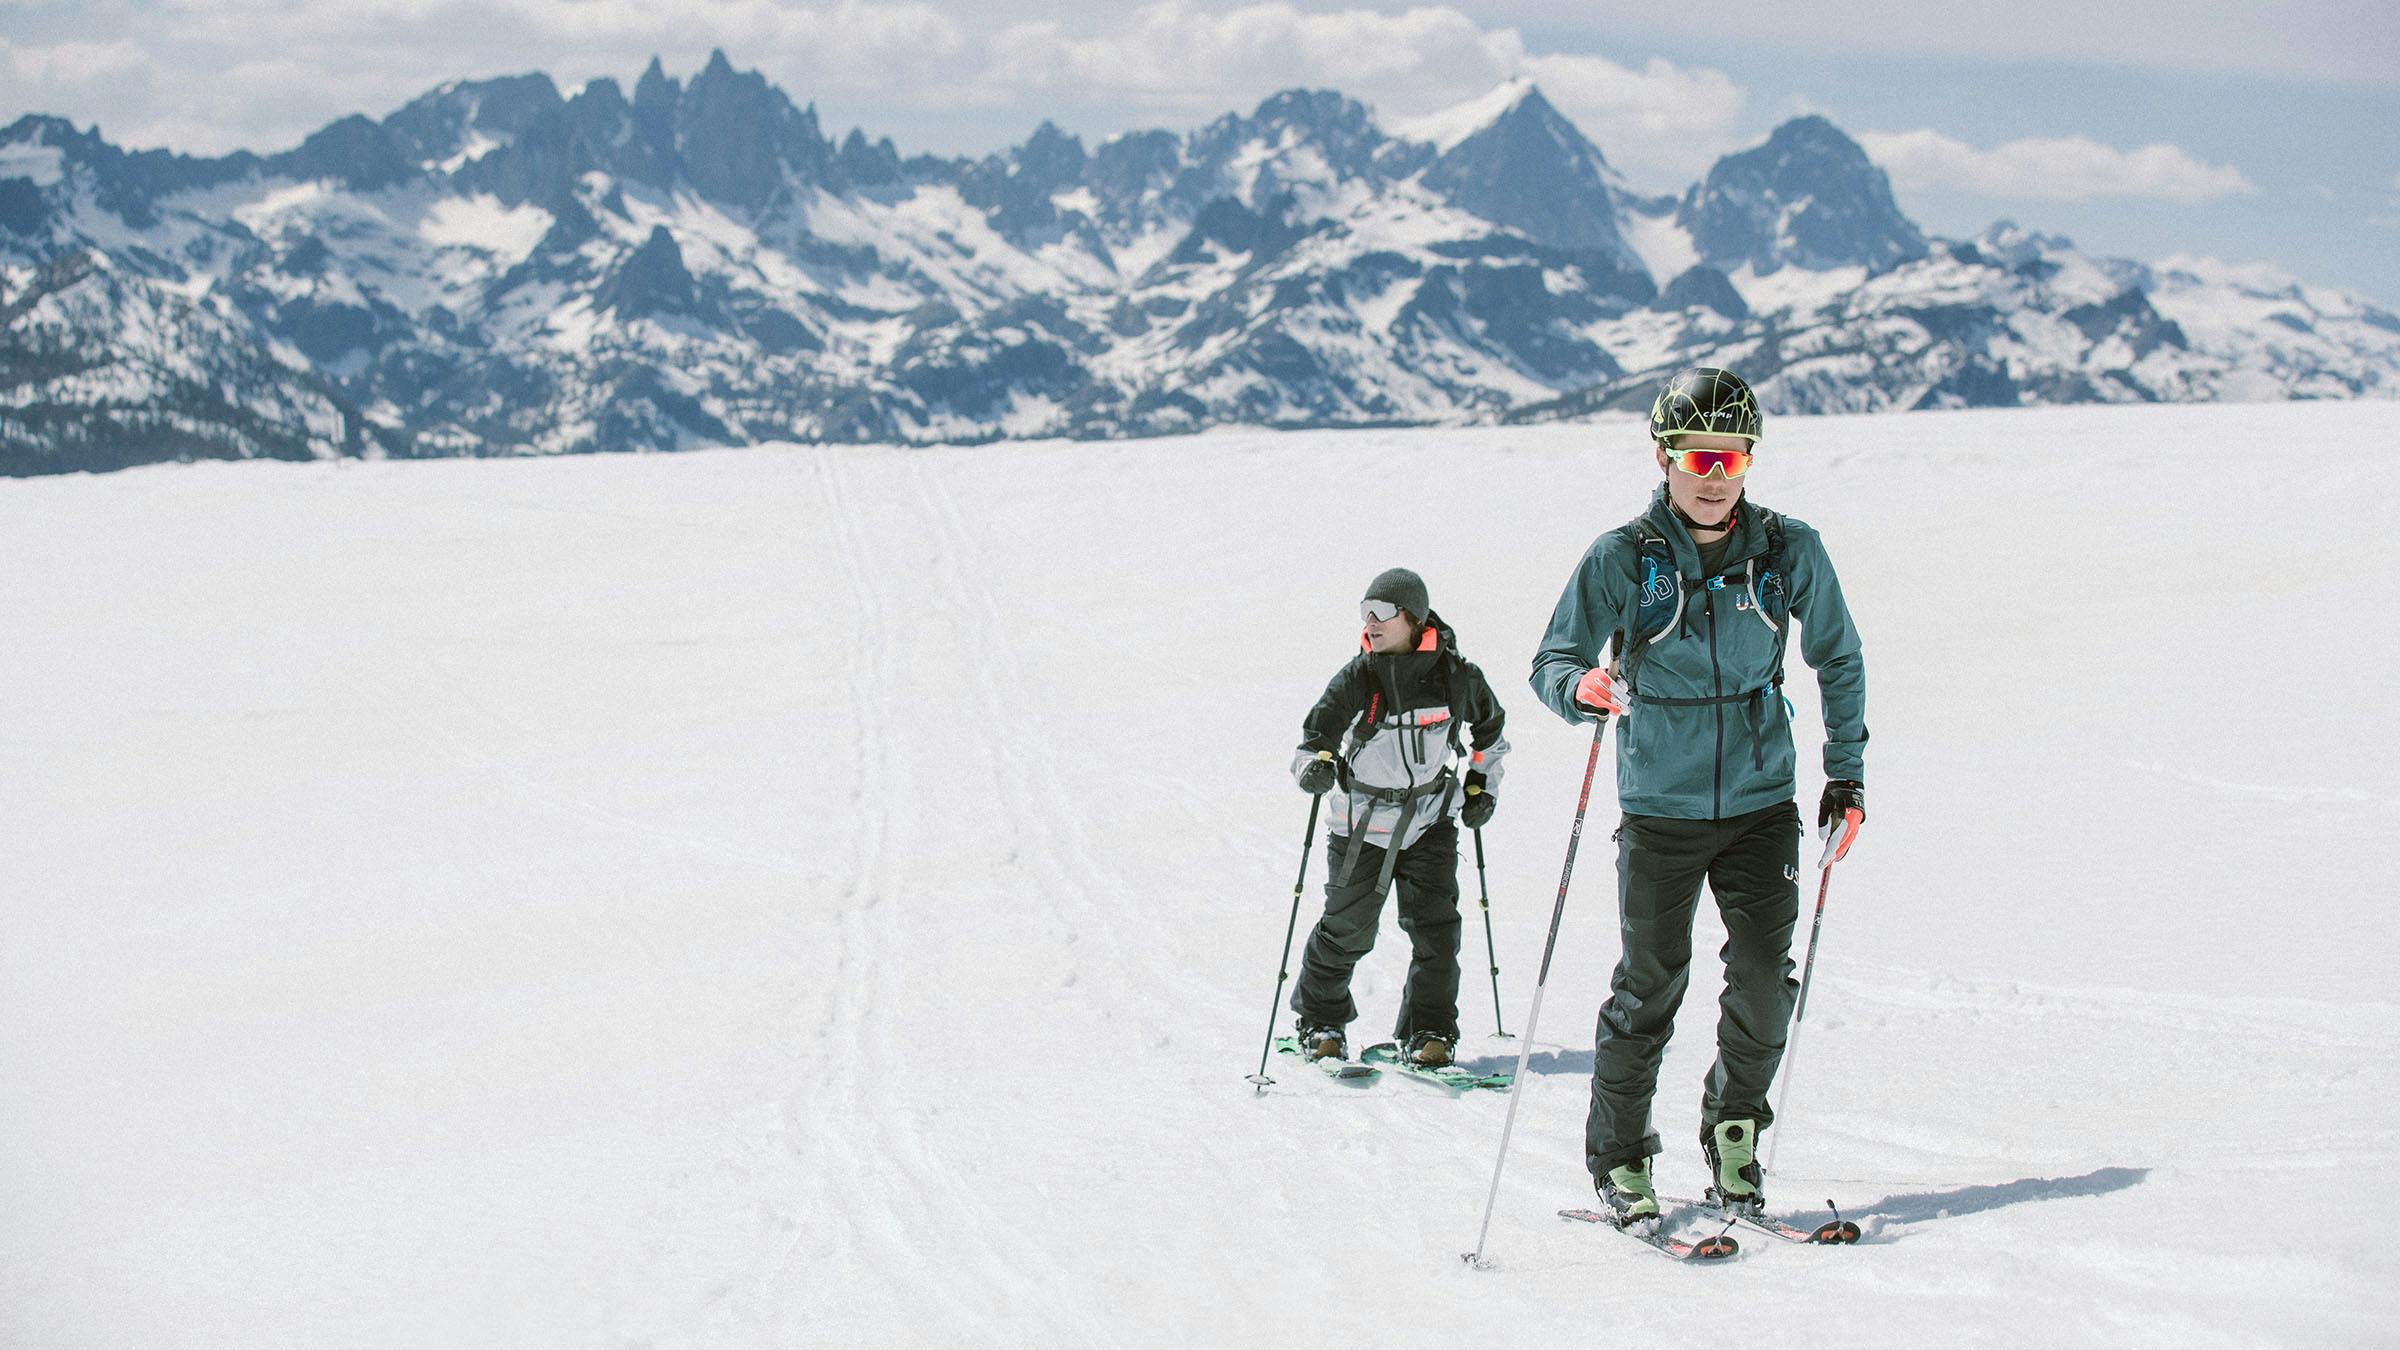 Backcountry skiers with the Minarets, Mount Ritter, and Banner Peak in the background